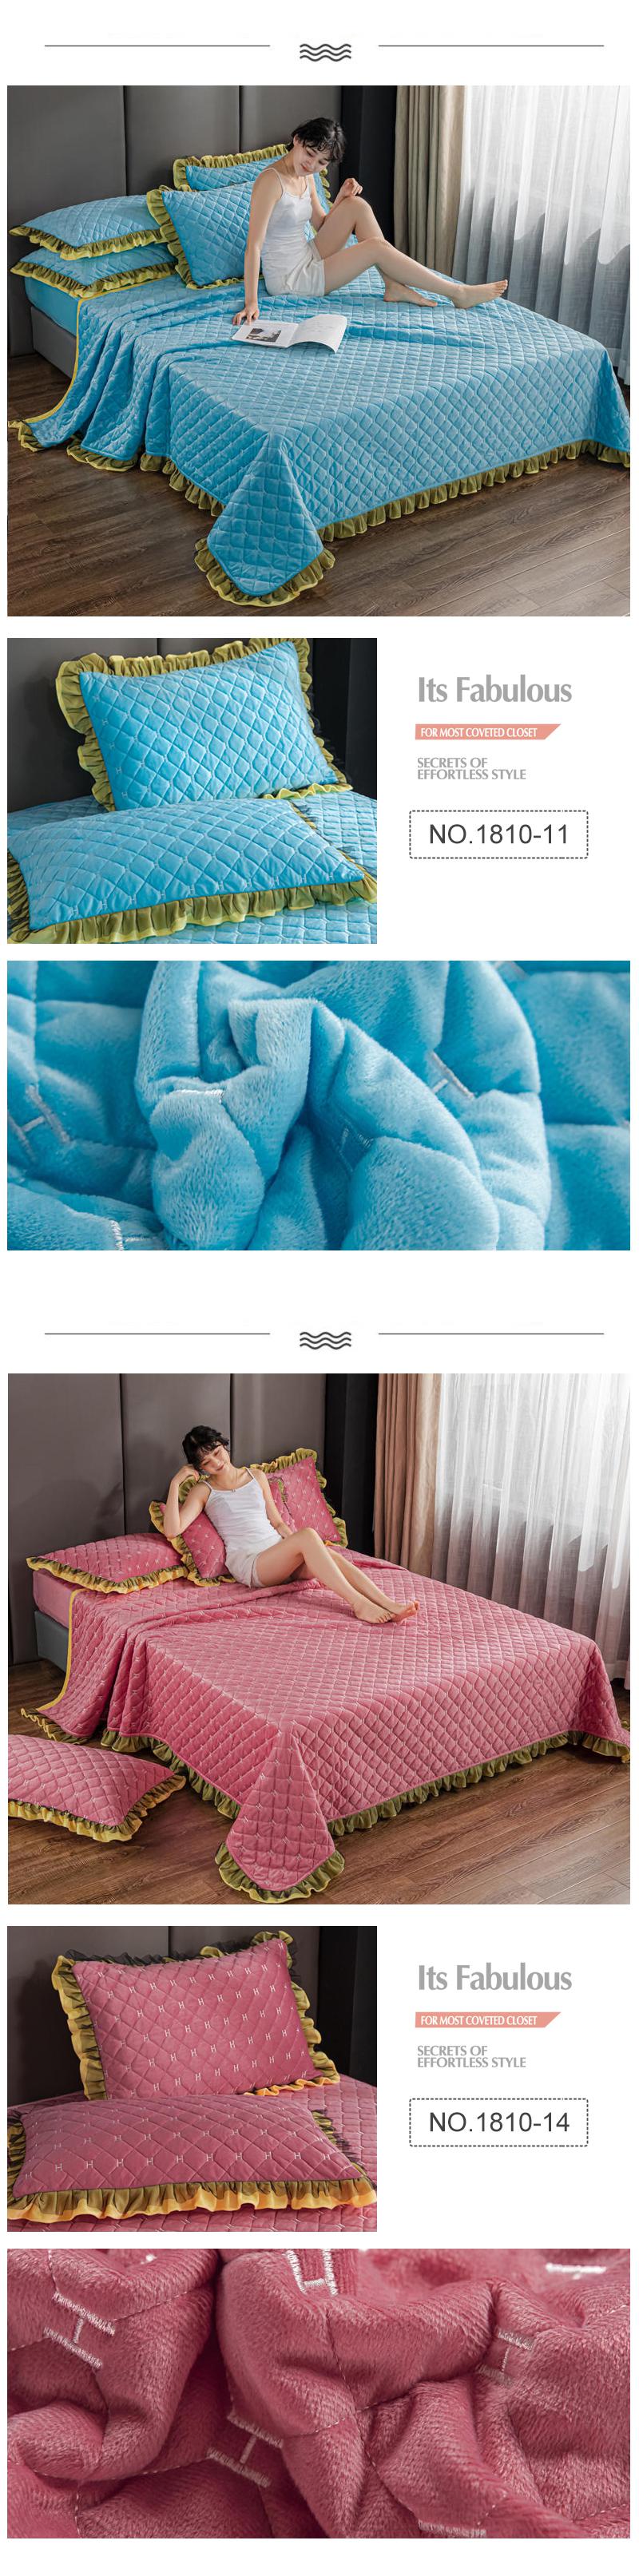 Fashions Bedspread King Bed